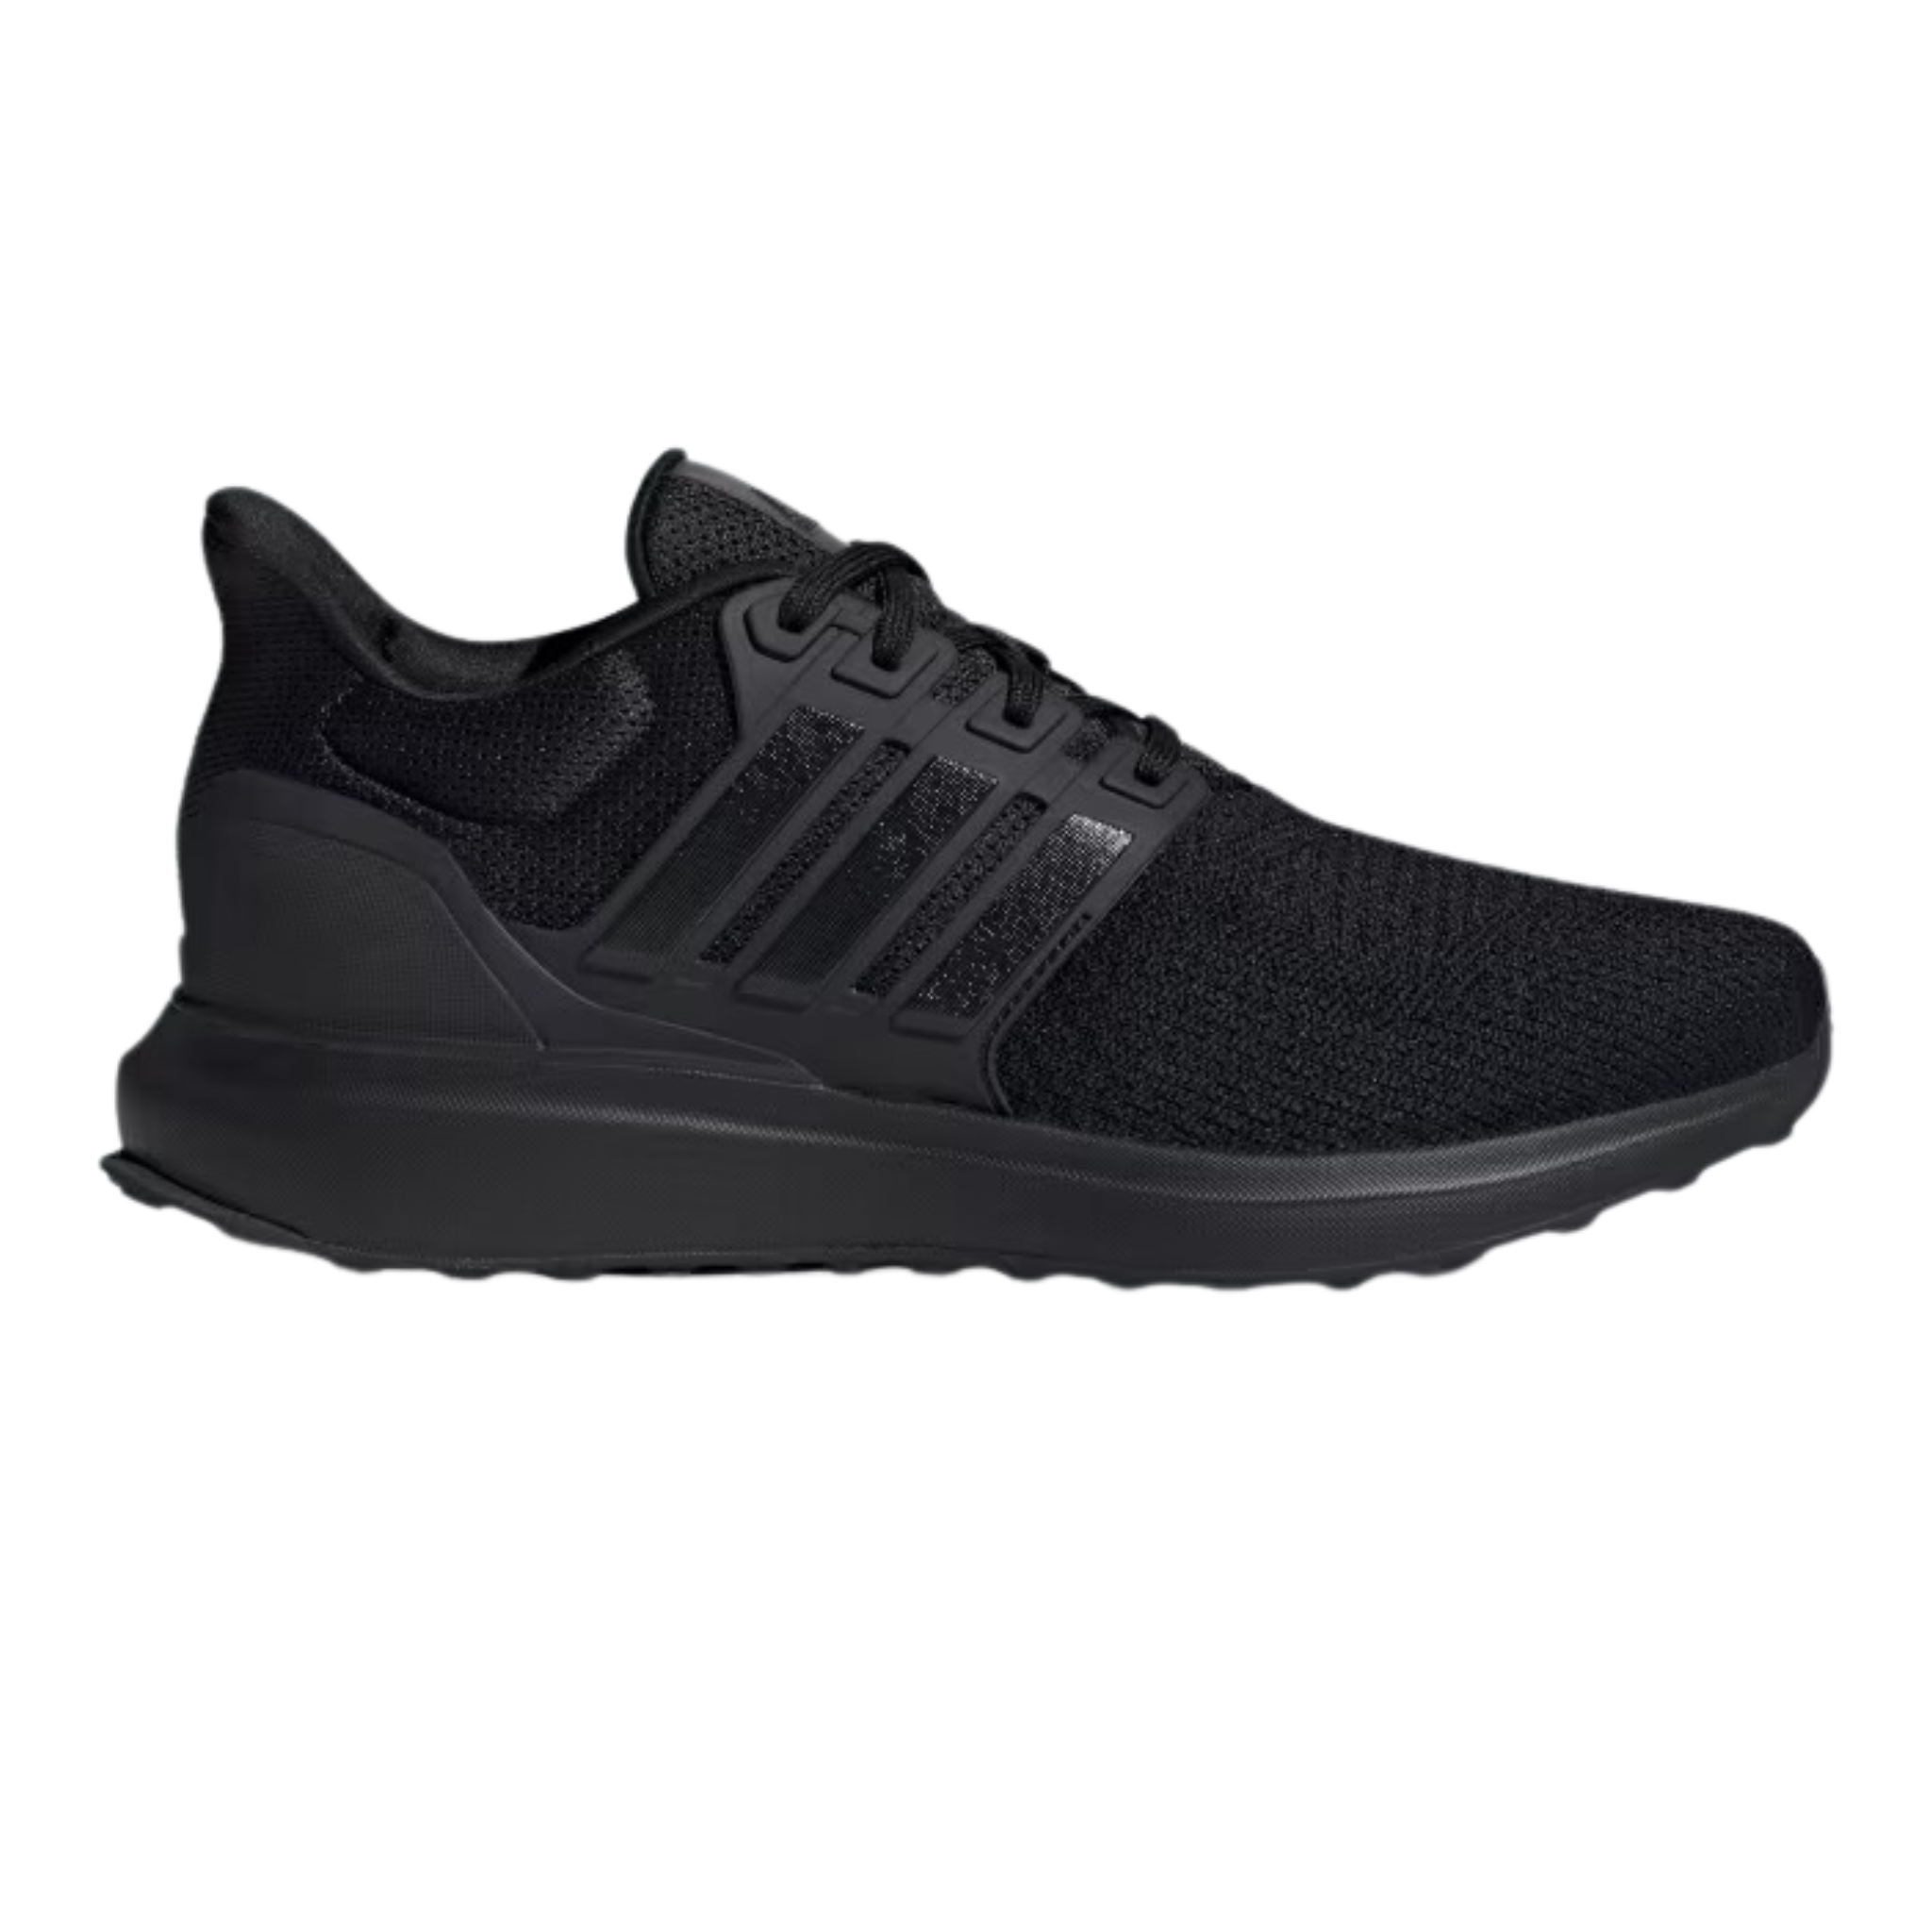 Adidas Women's Sneakers On Sale (2 Colors)